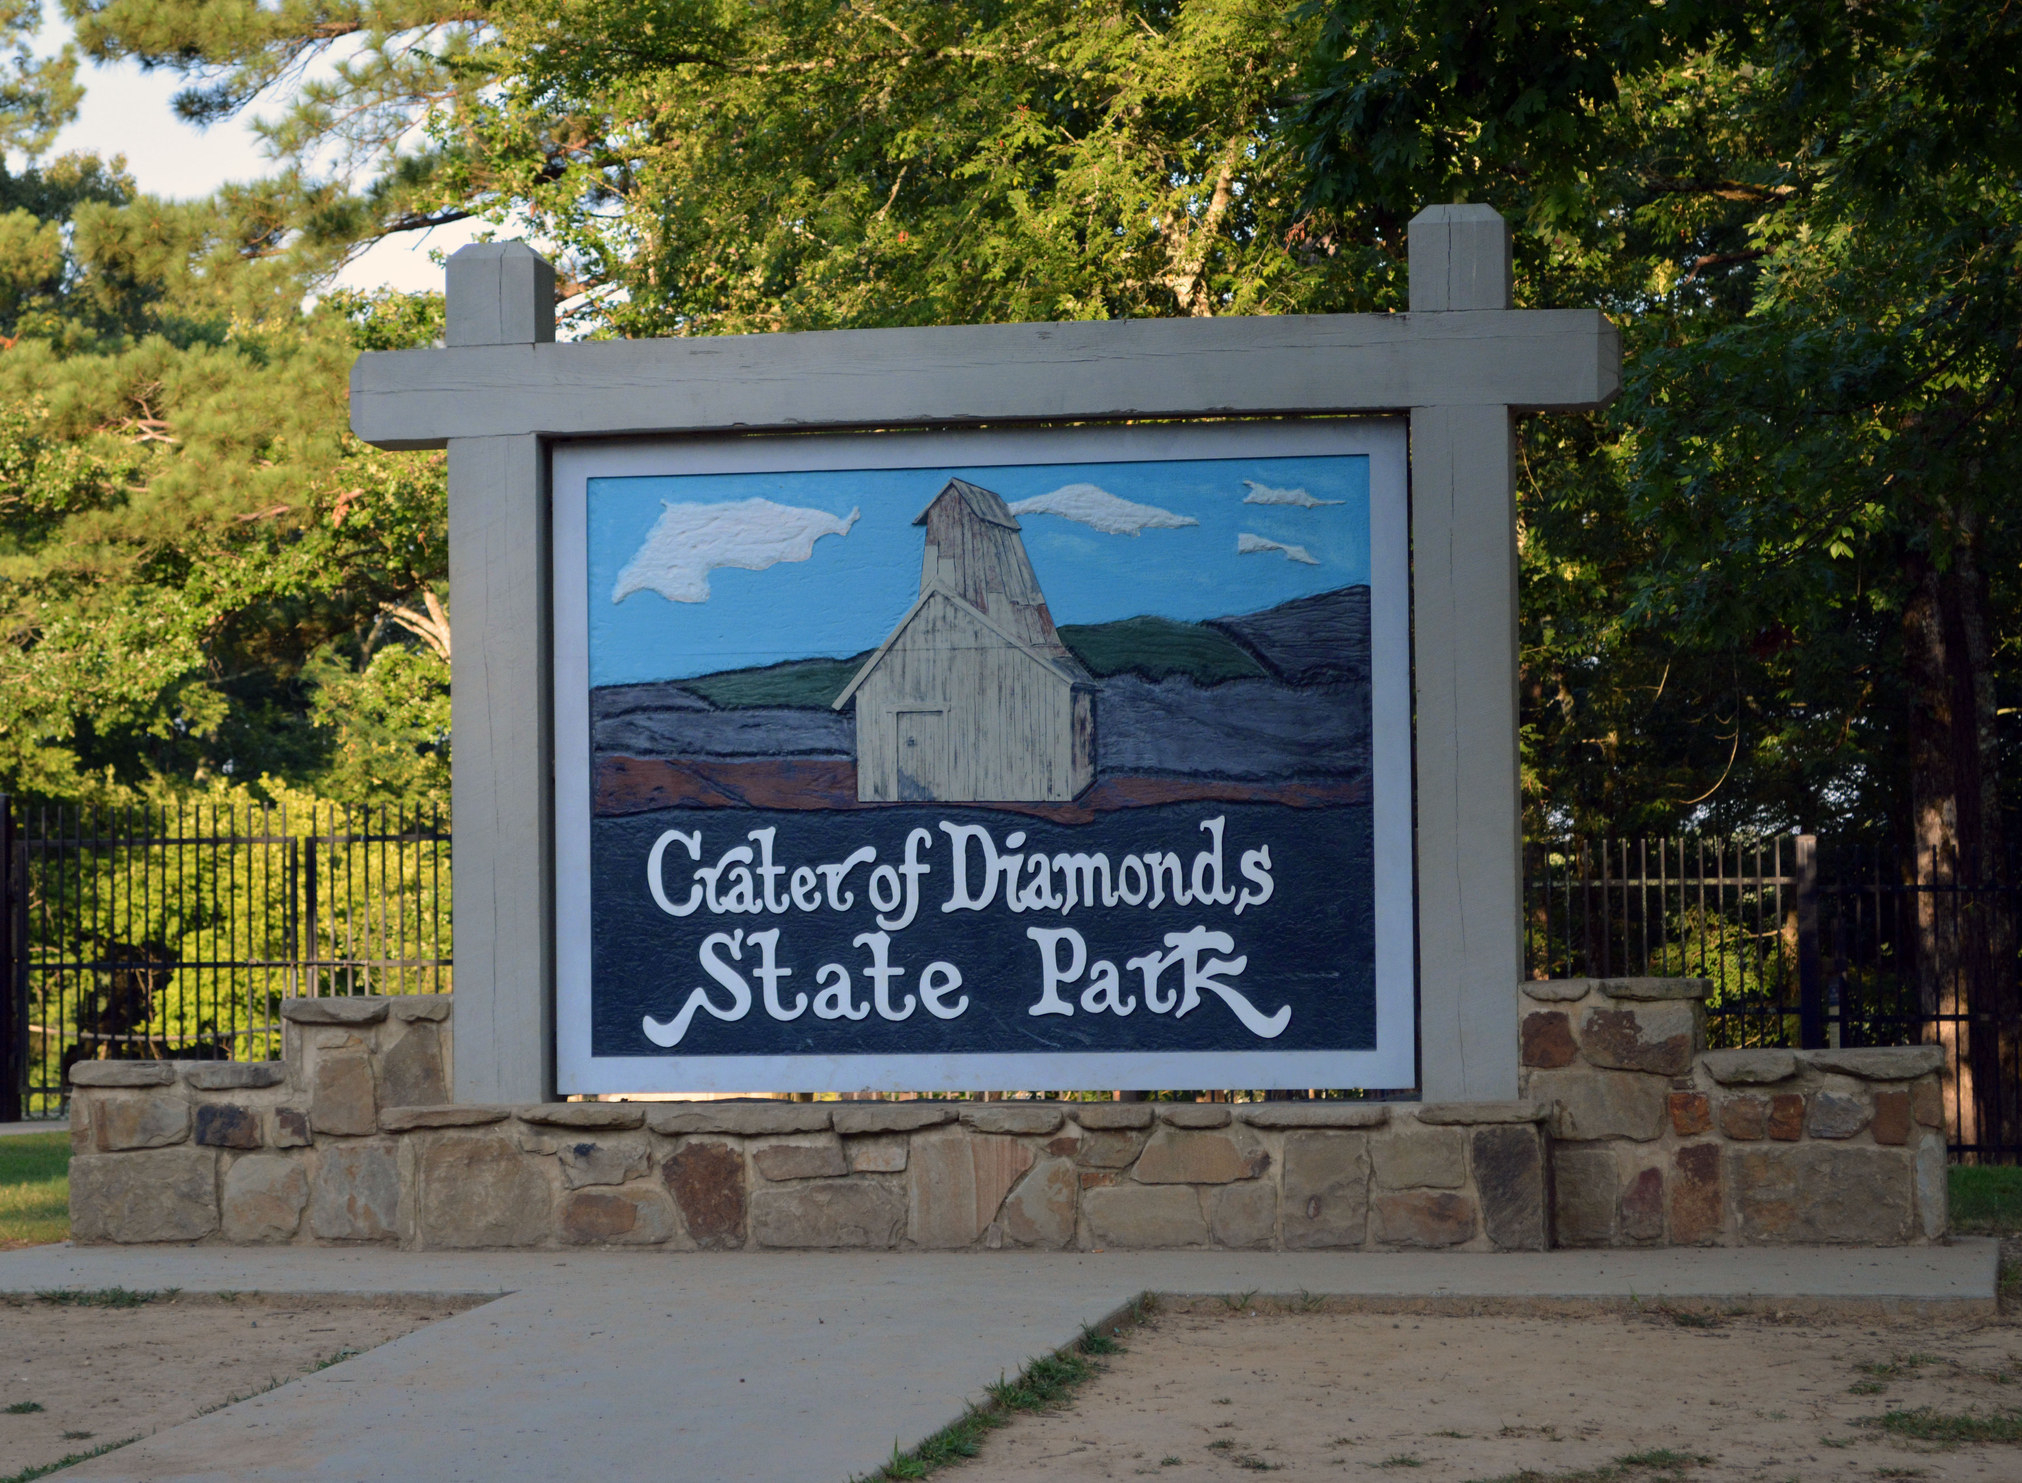 The sign advertising Crater of Diamonds State Park